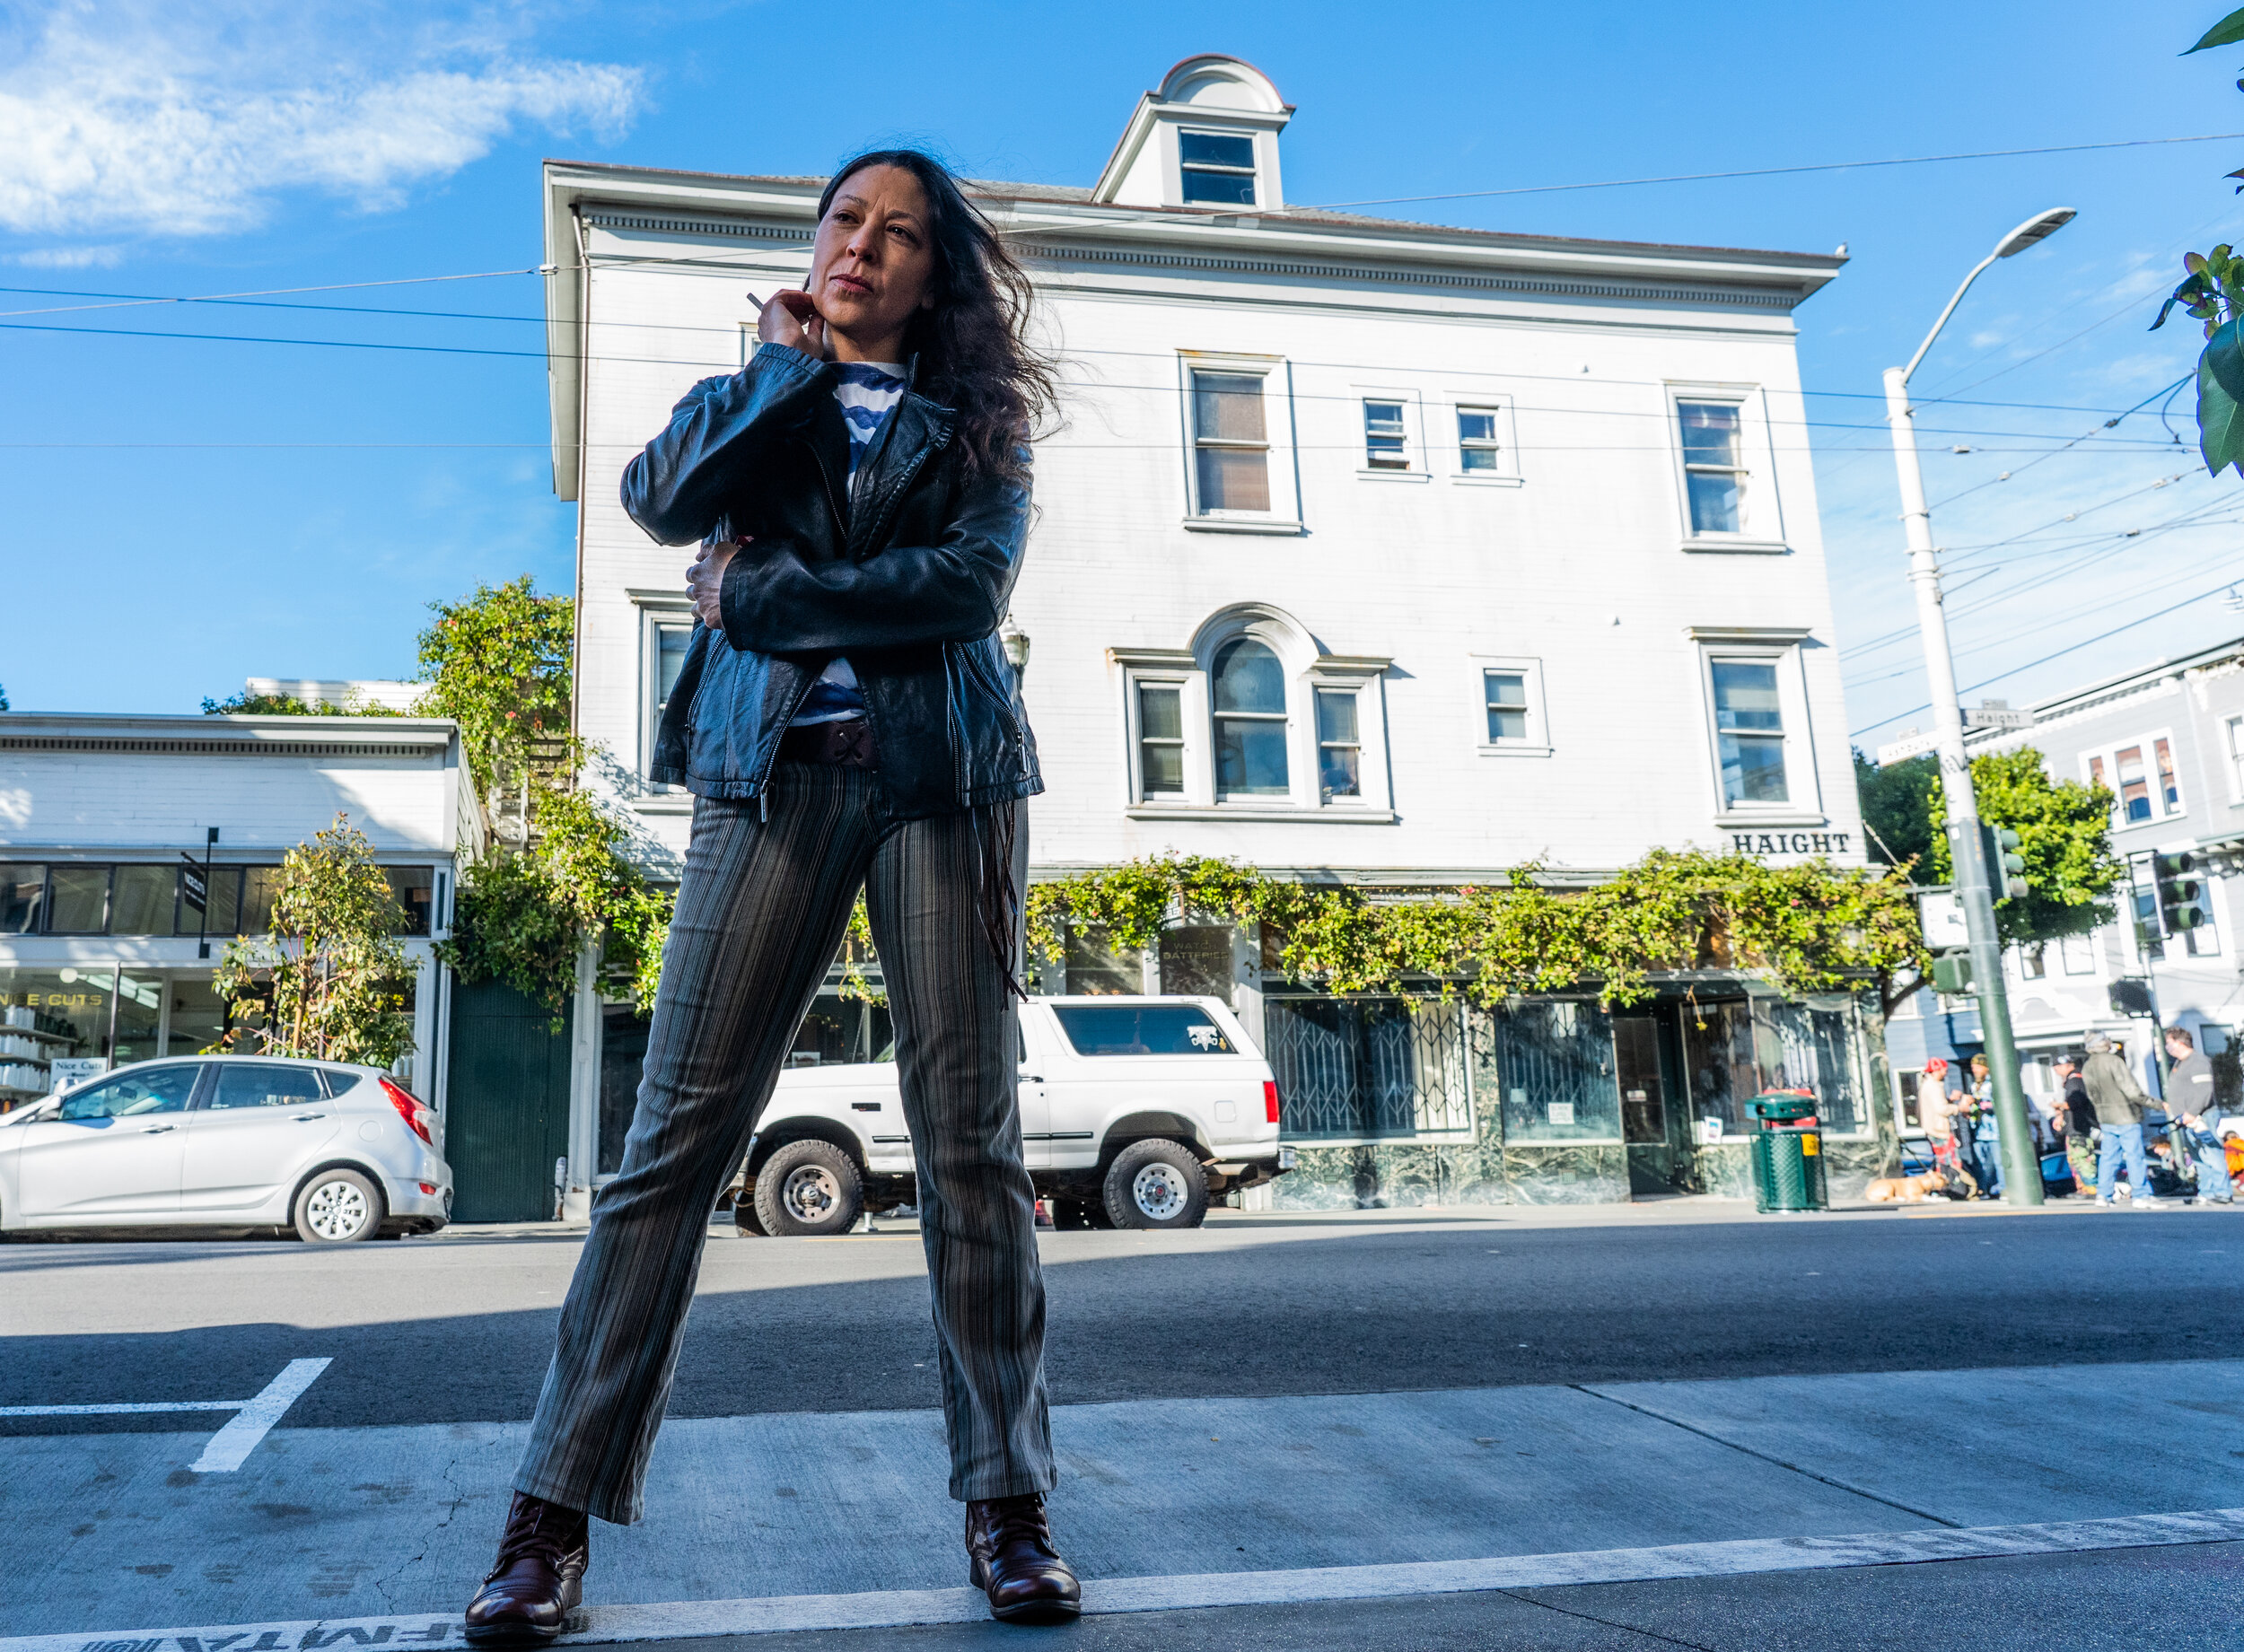 A9_00760-C. OUTofSiteHAIGHT. Tina D'Elia. Haight and Ashbury. Credit Robbie Sweeny. 2.23.21.jpg